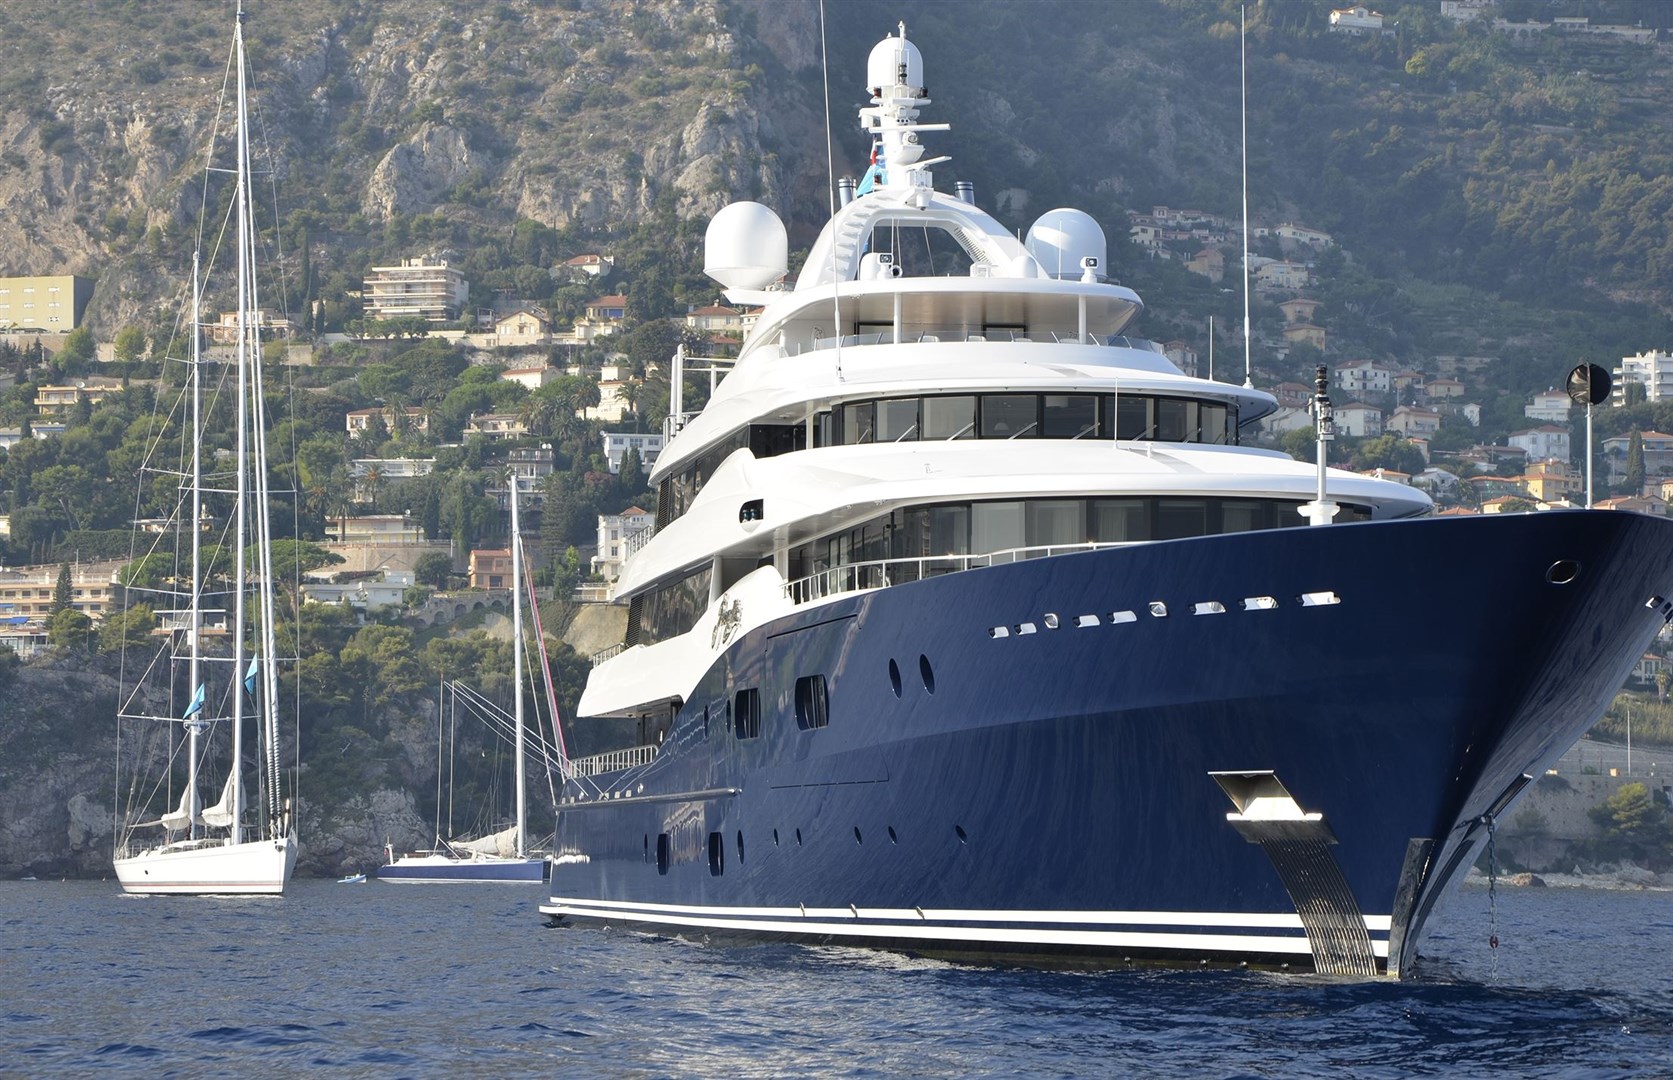 The band can look forward to boarding a swish superyacht at the Monaco Grand Prix.